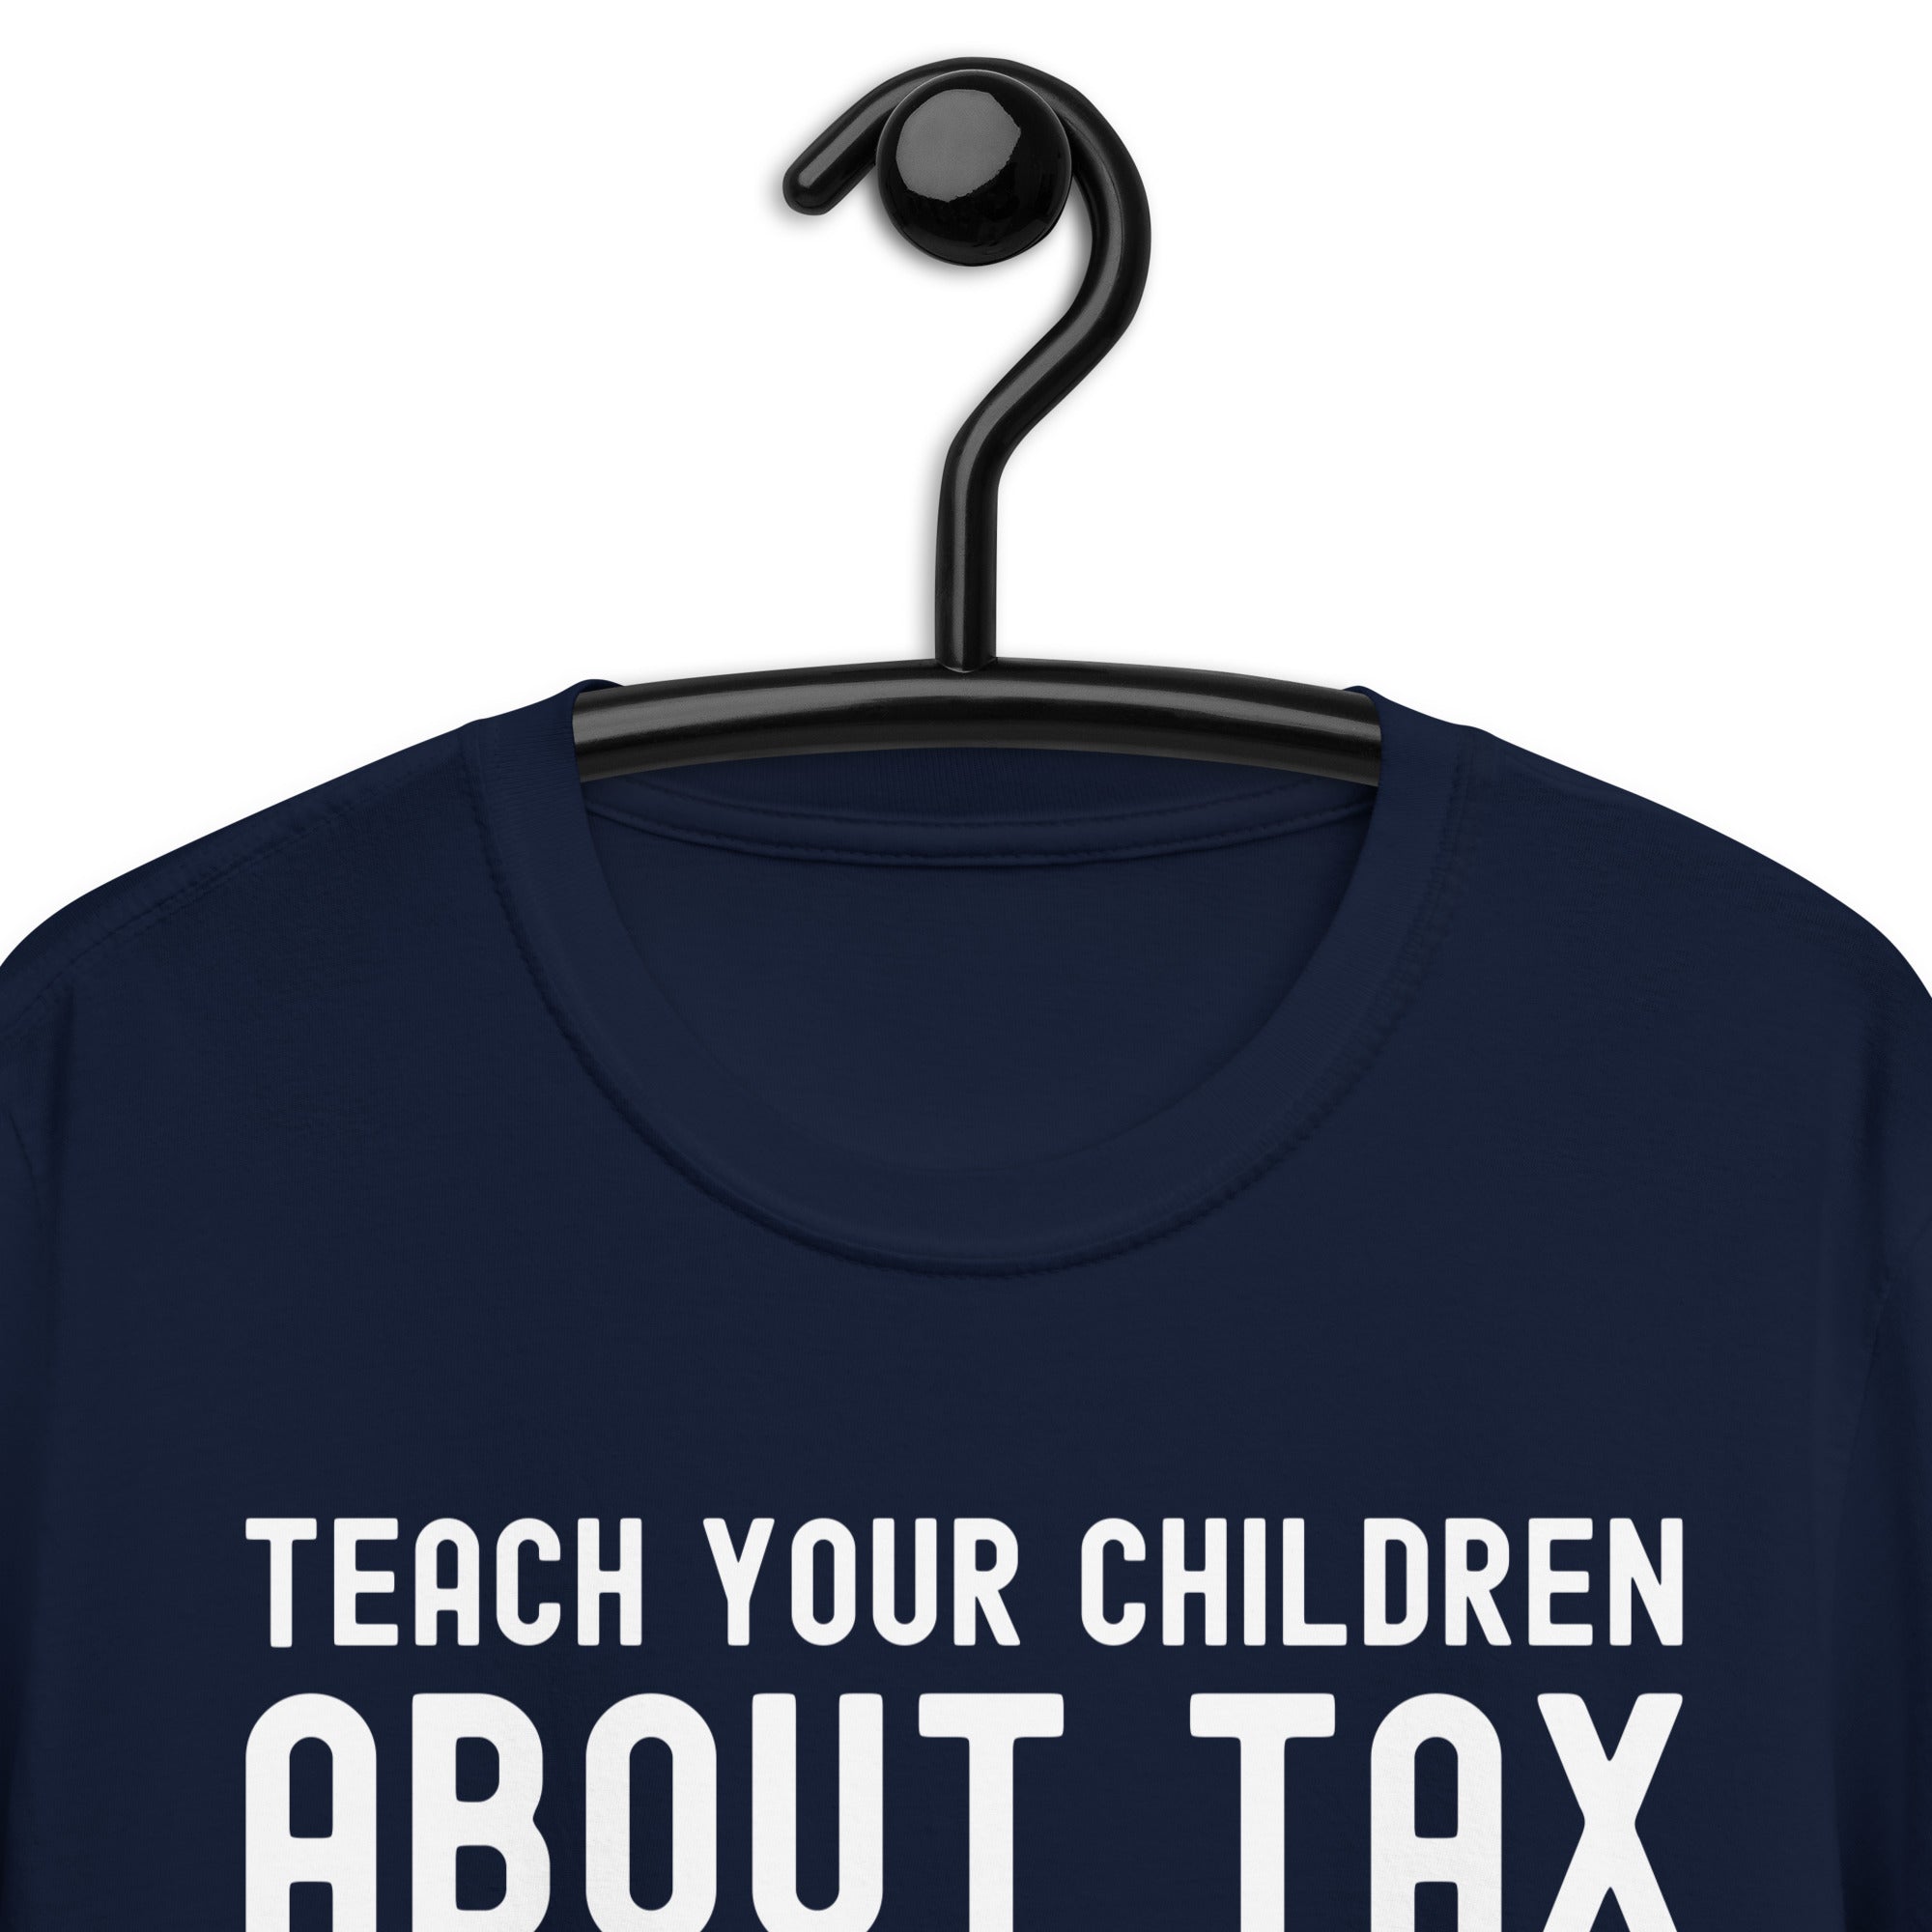 Short-Sleeve Unisex T-Shirt | Teach your children about tax eat 30% of their ice cream